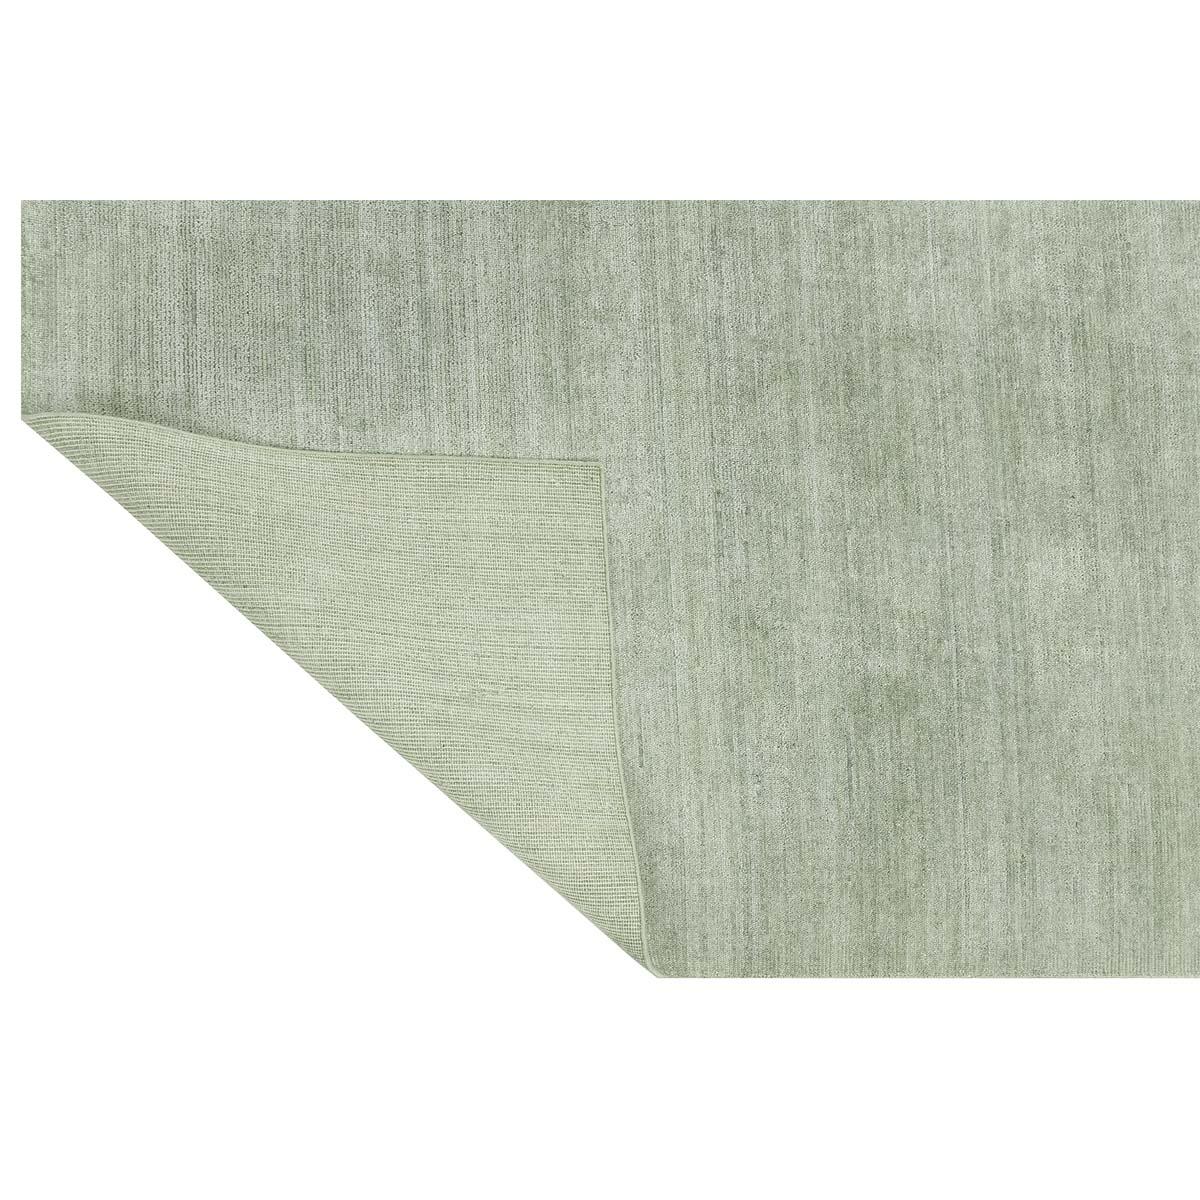 Indian Luxurious Hand Loomed Light Green Area Rug For Sale